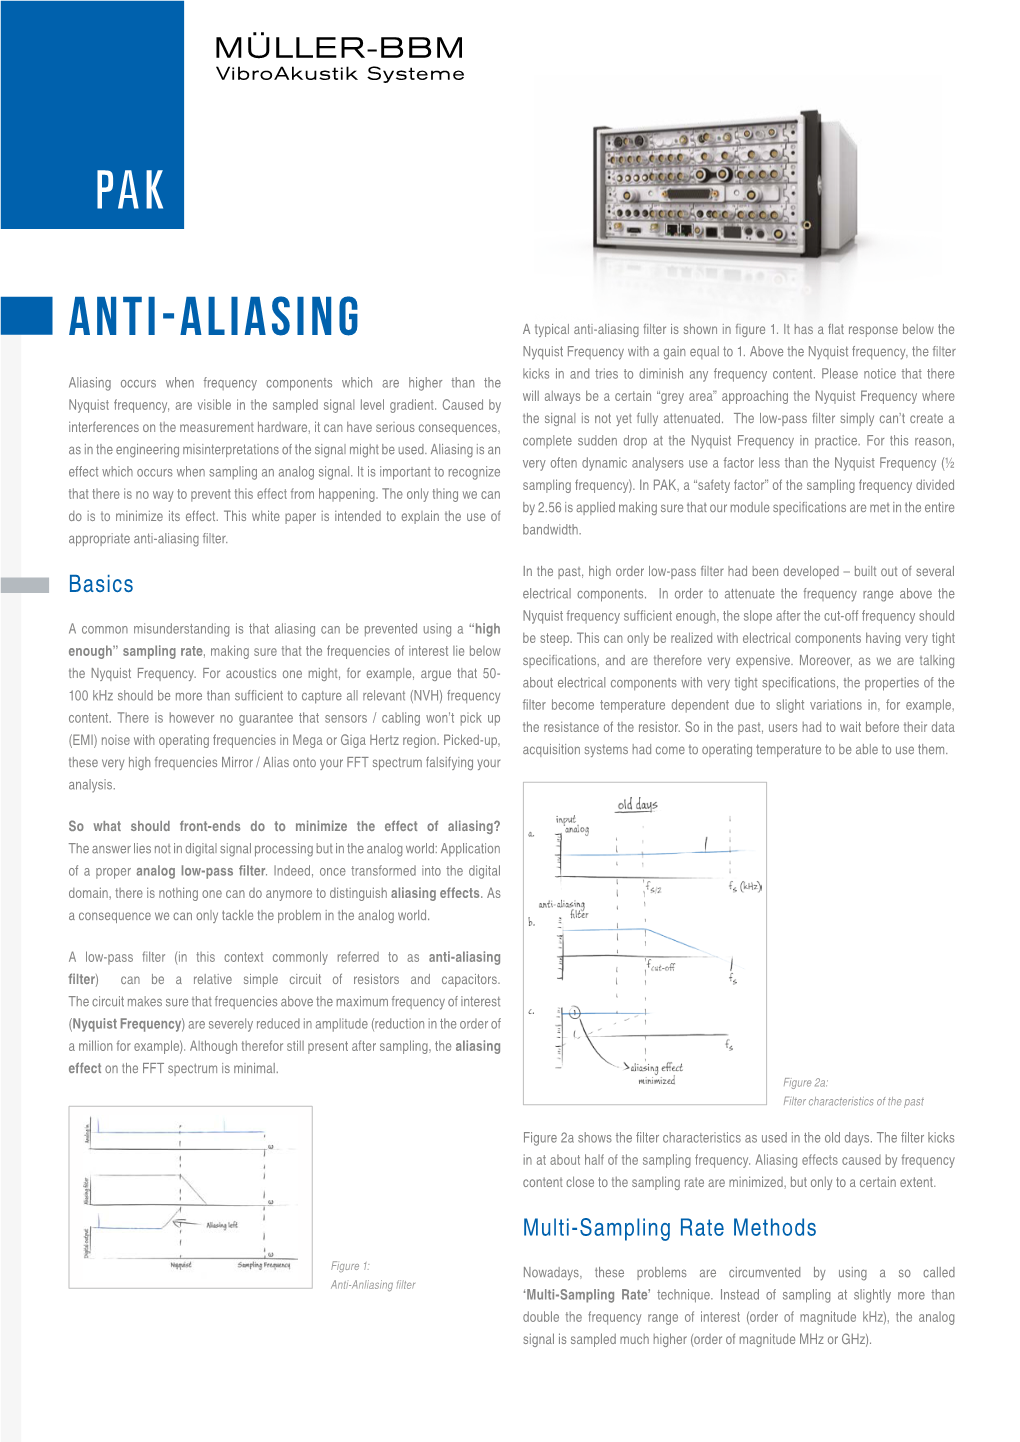 ANTI-ALIASING a Typical Anti-Aliasing Filter Is Shown in Figure 1